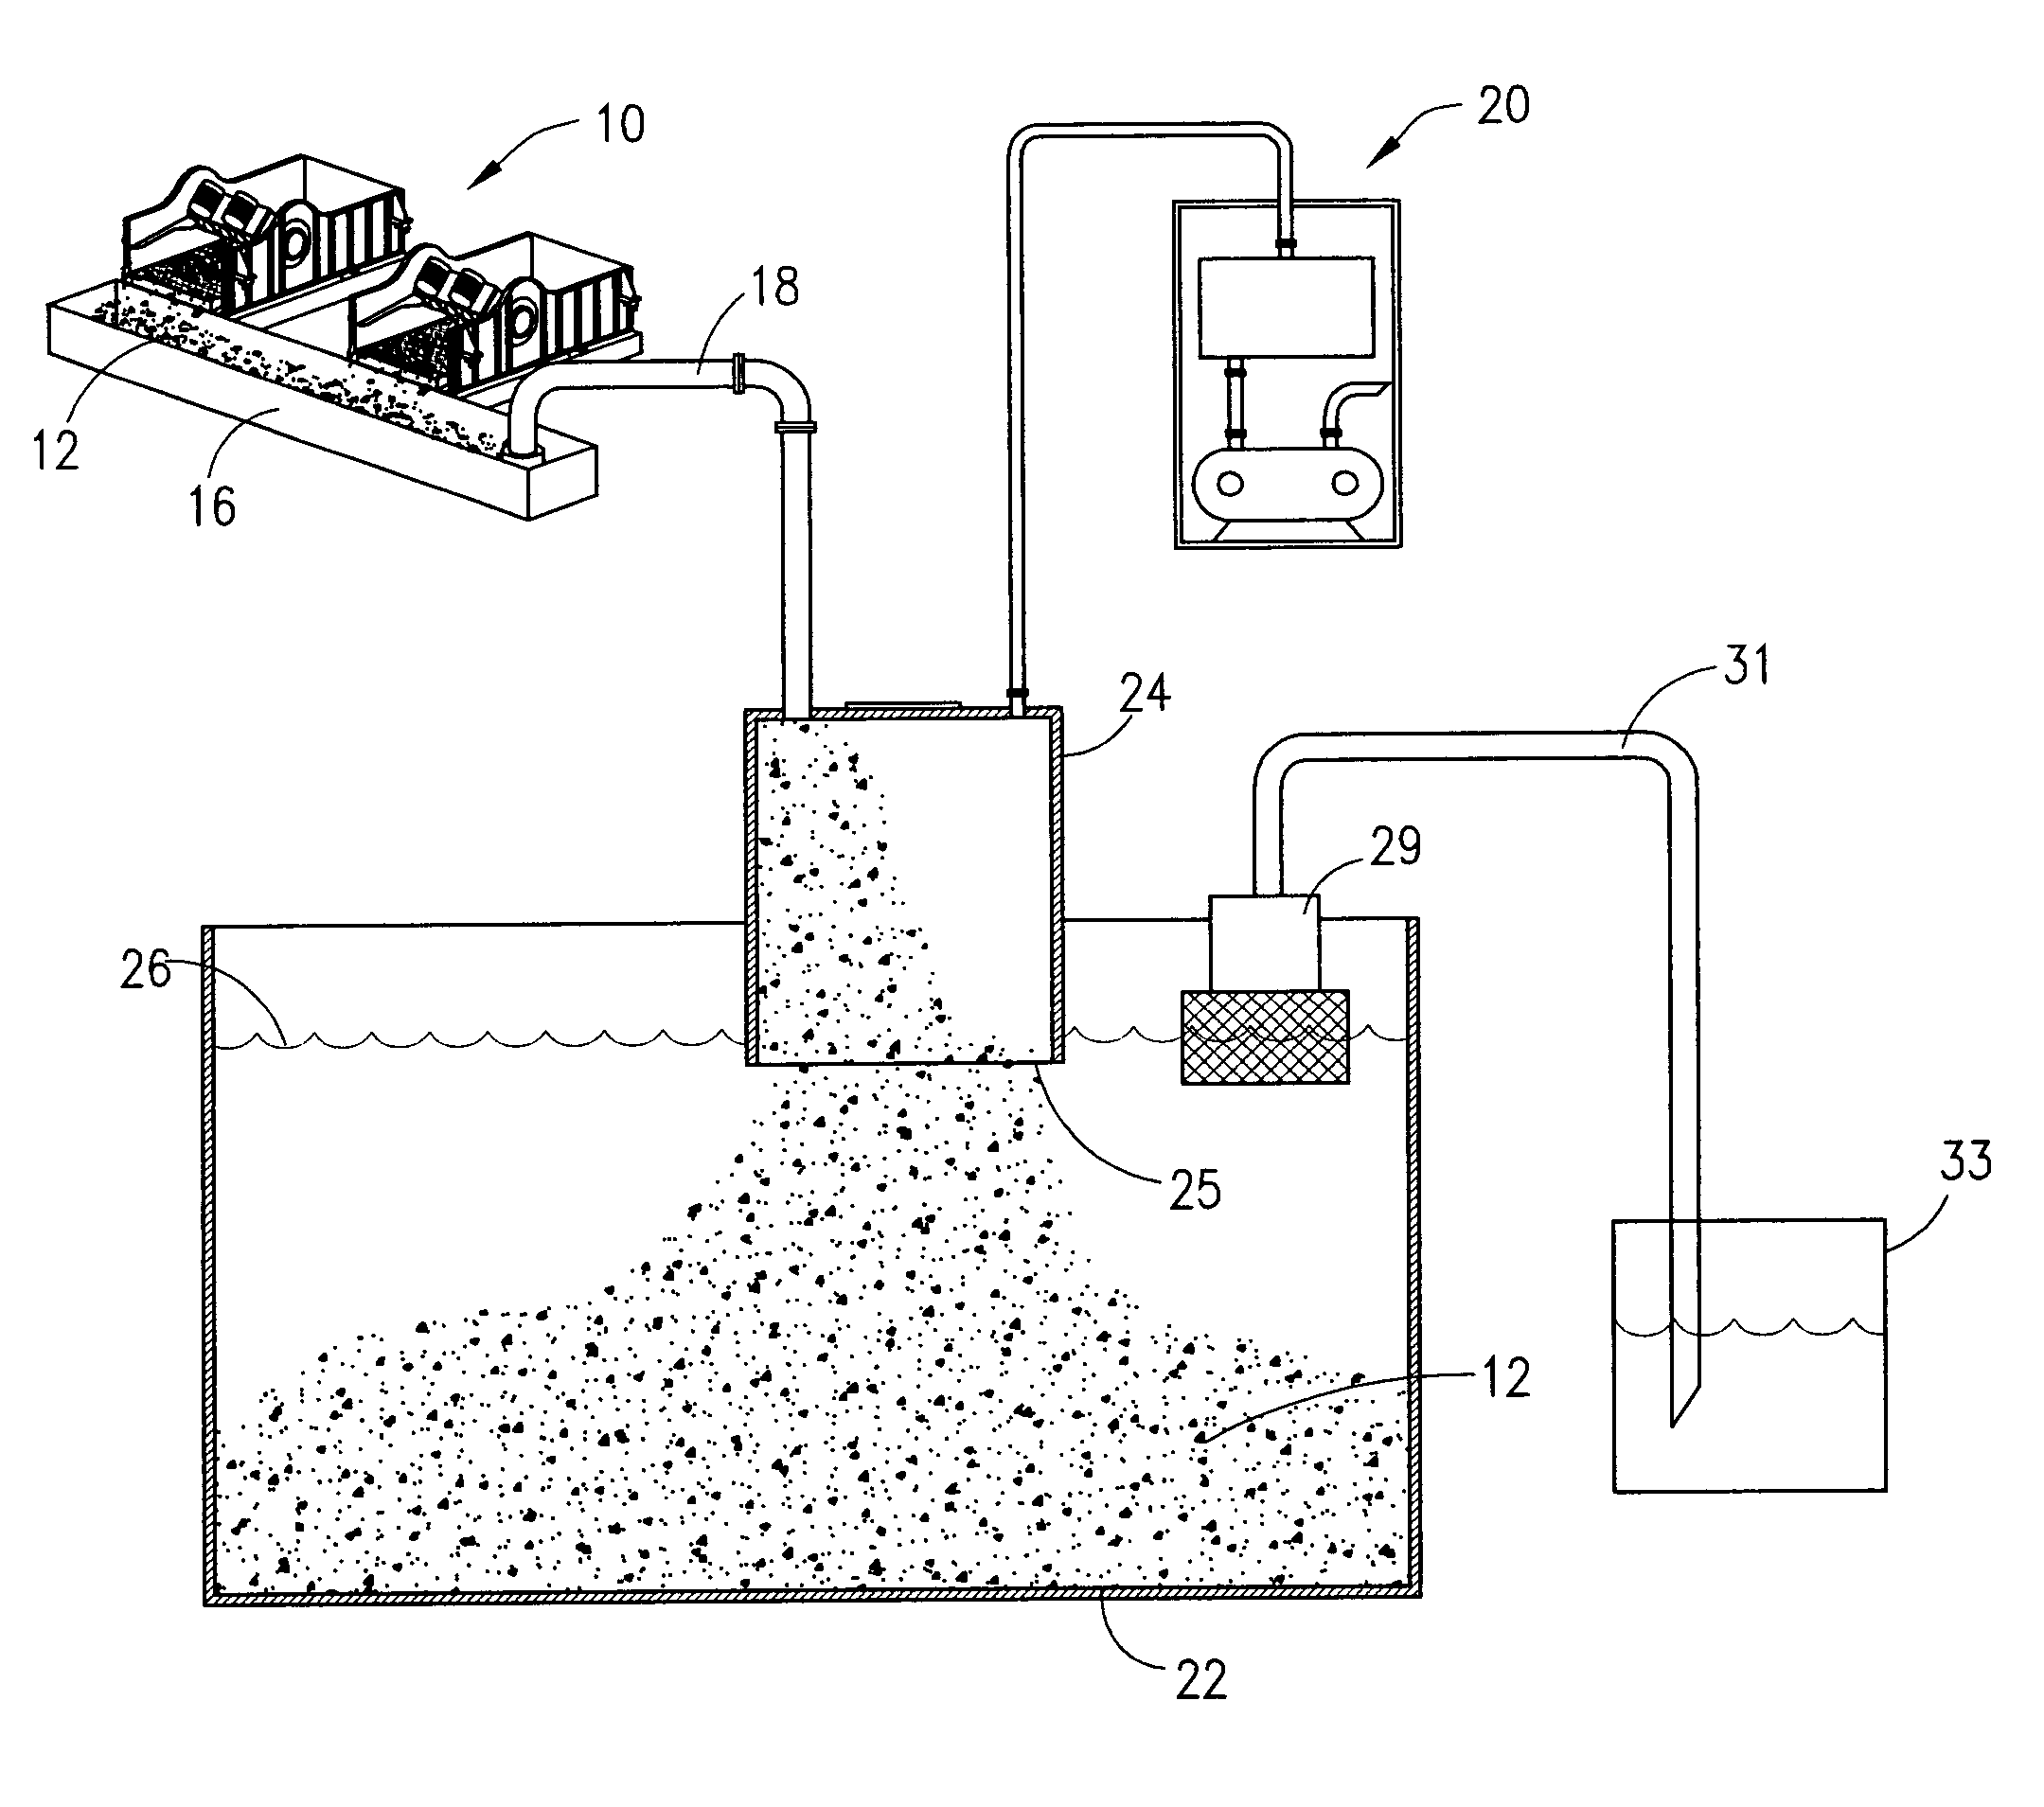 Method and apparatus for vacuum collecting and gravity depositing drill cuttings